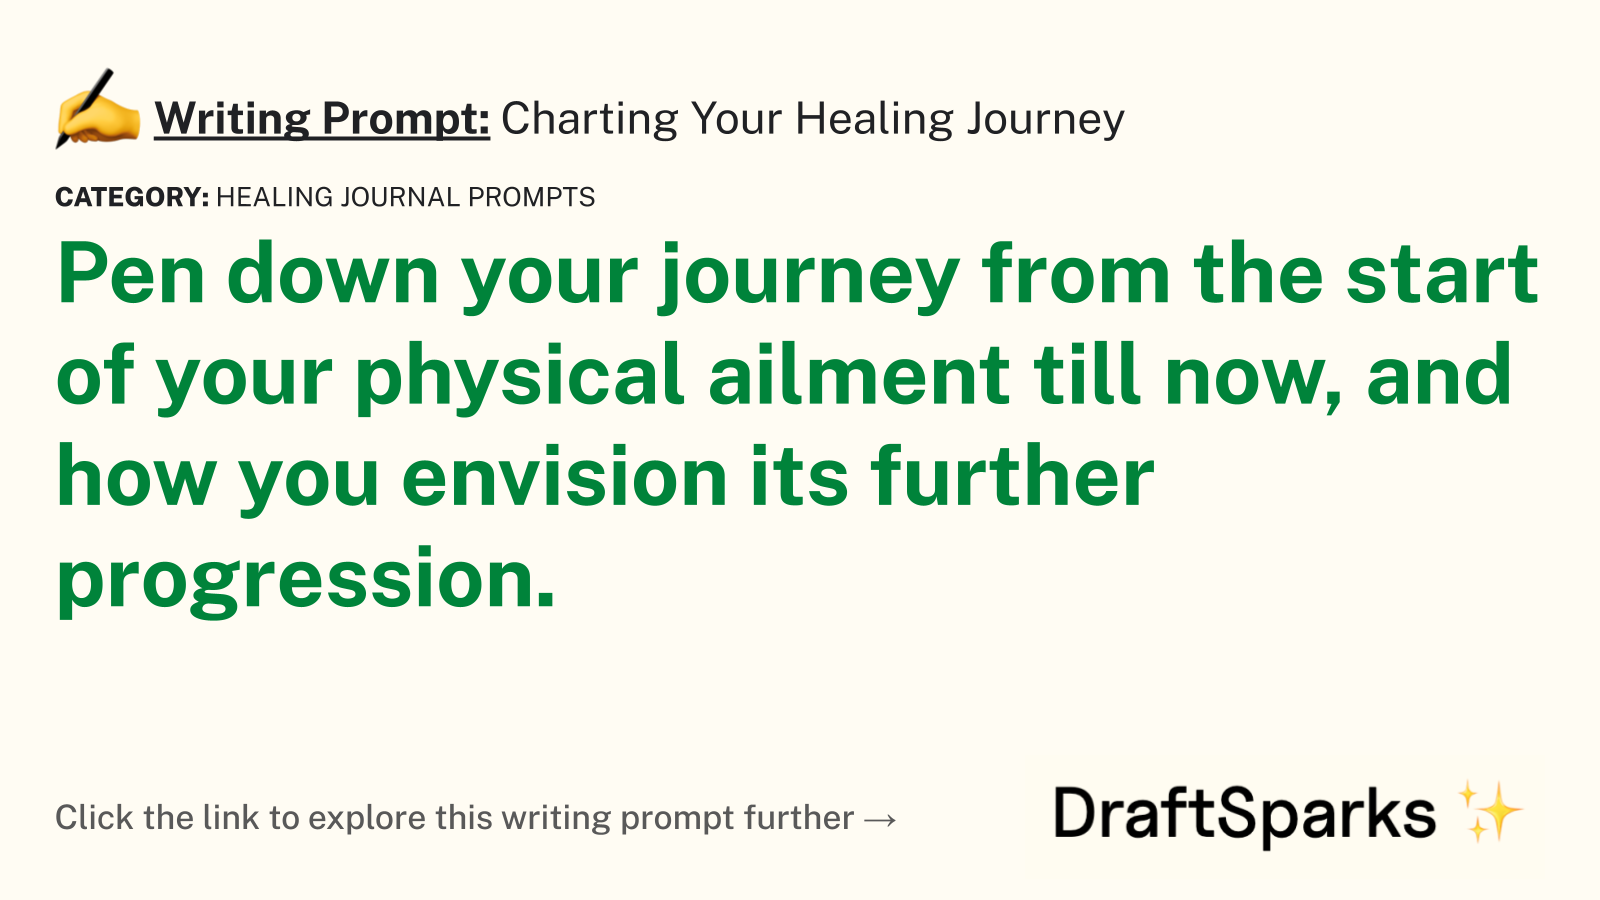 Charting Your Healing Journey